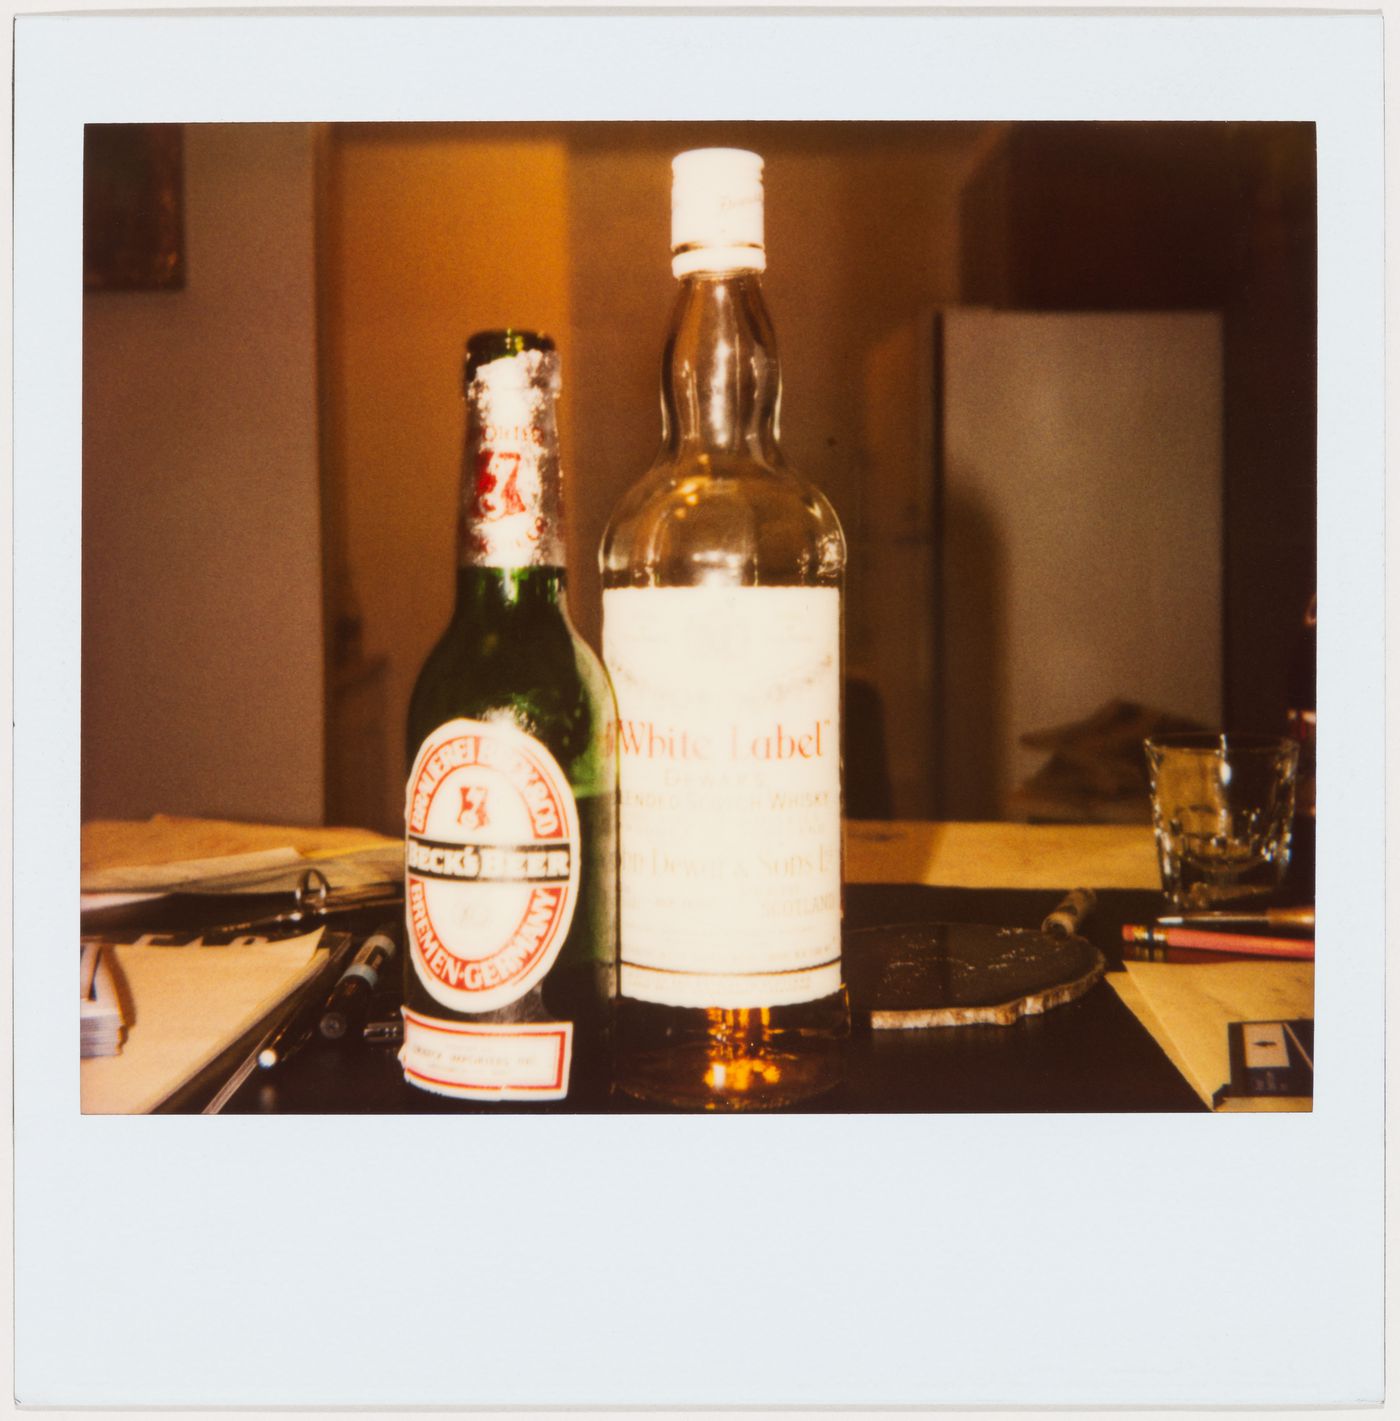 Beck’s Beer and White Label Scotch bottles on a table